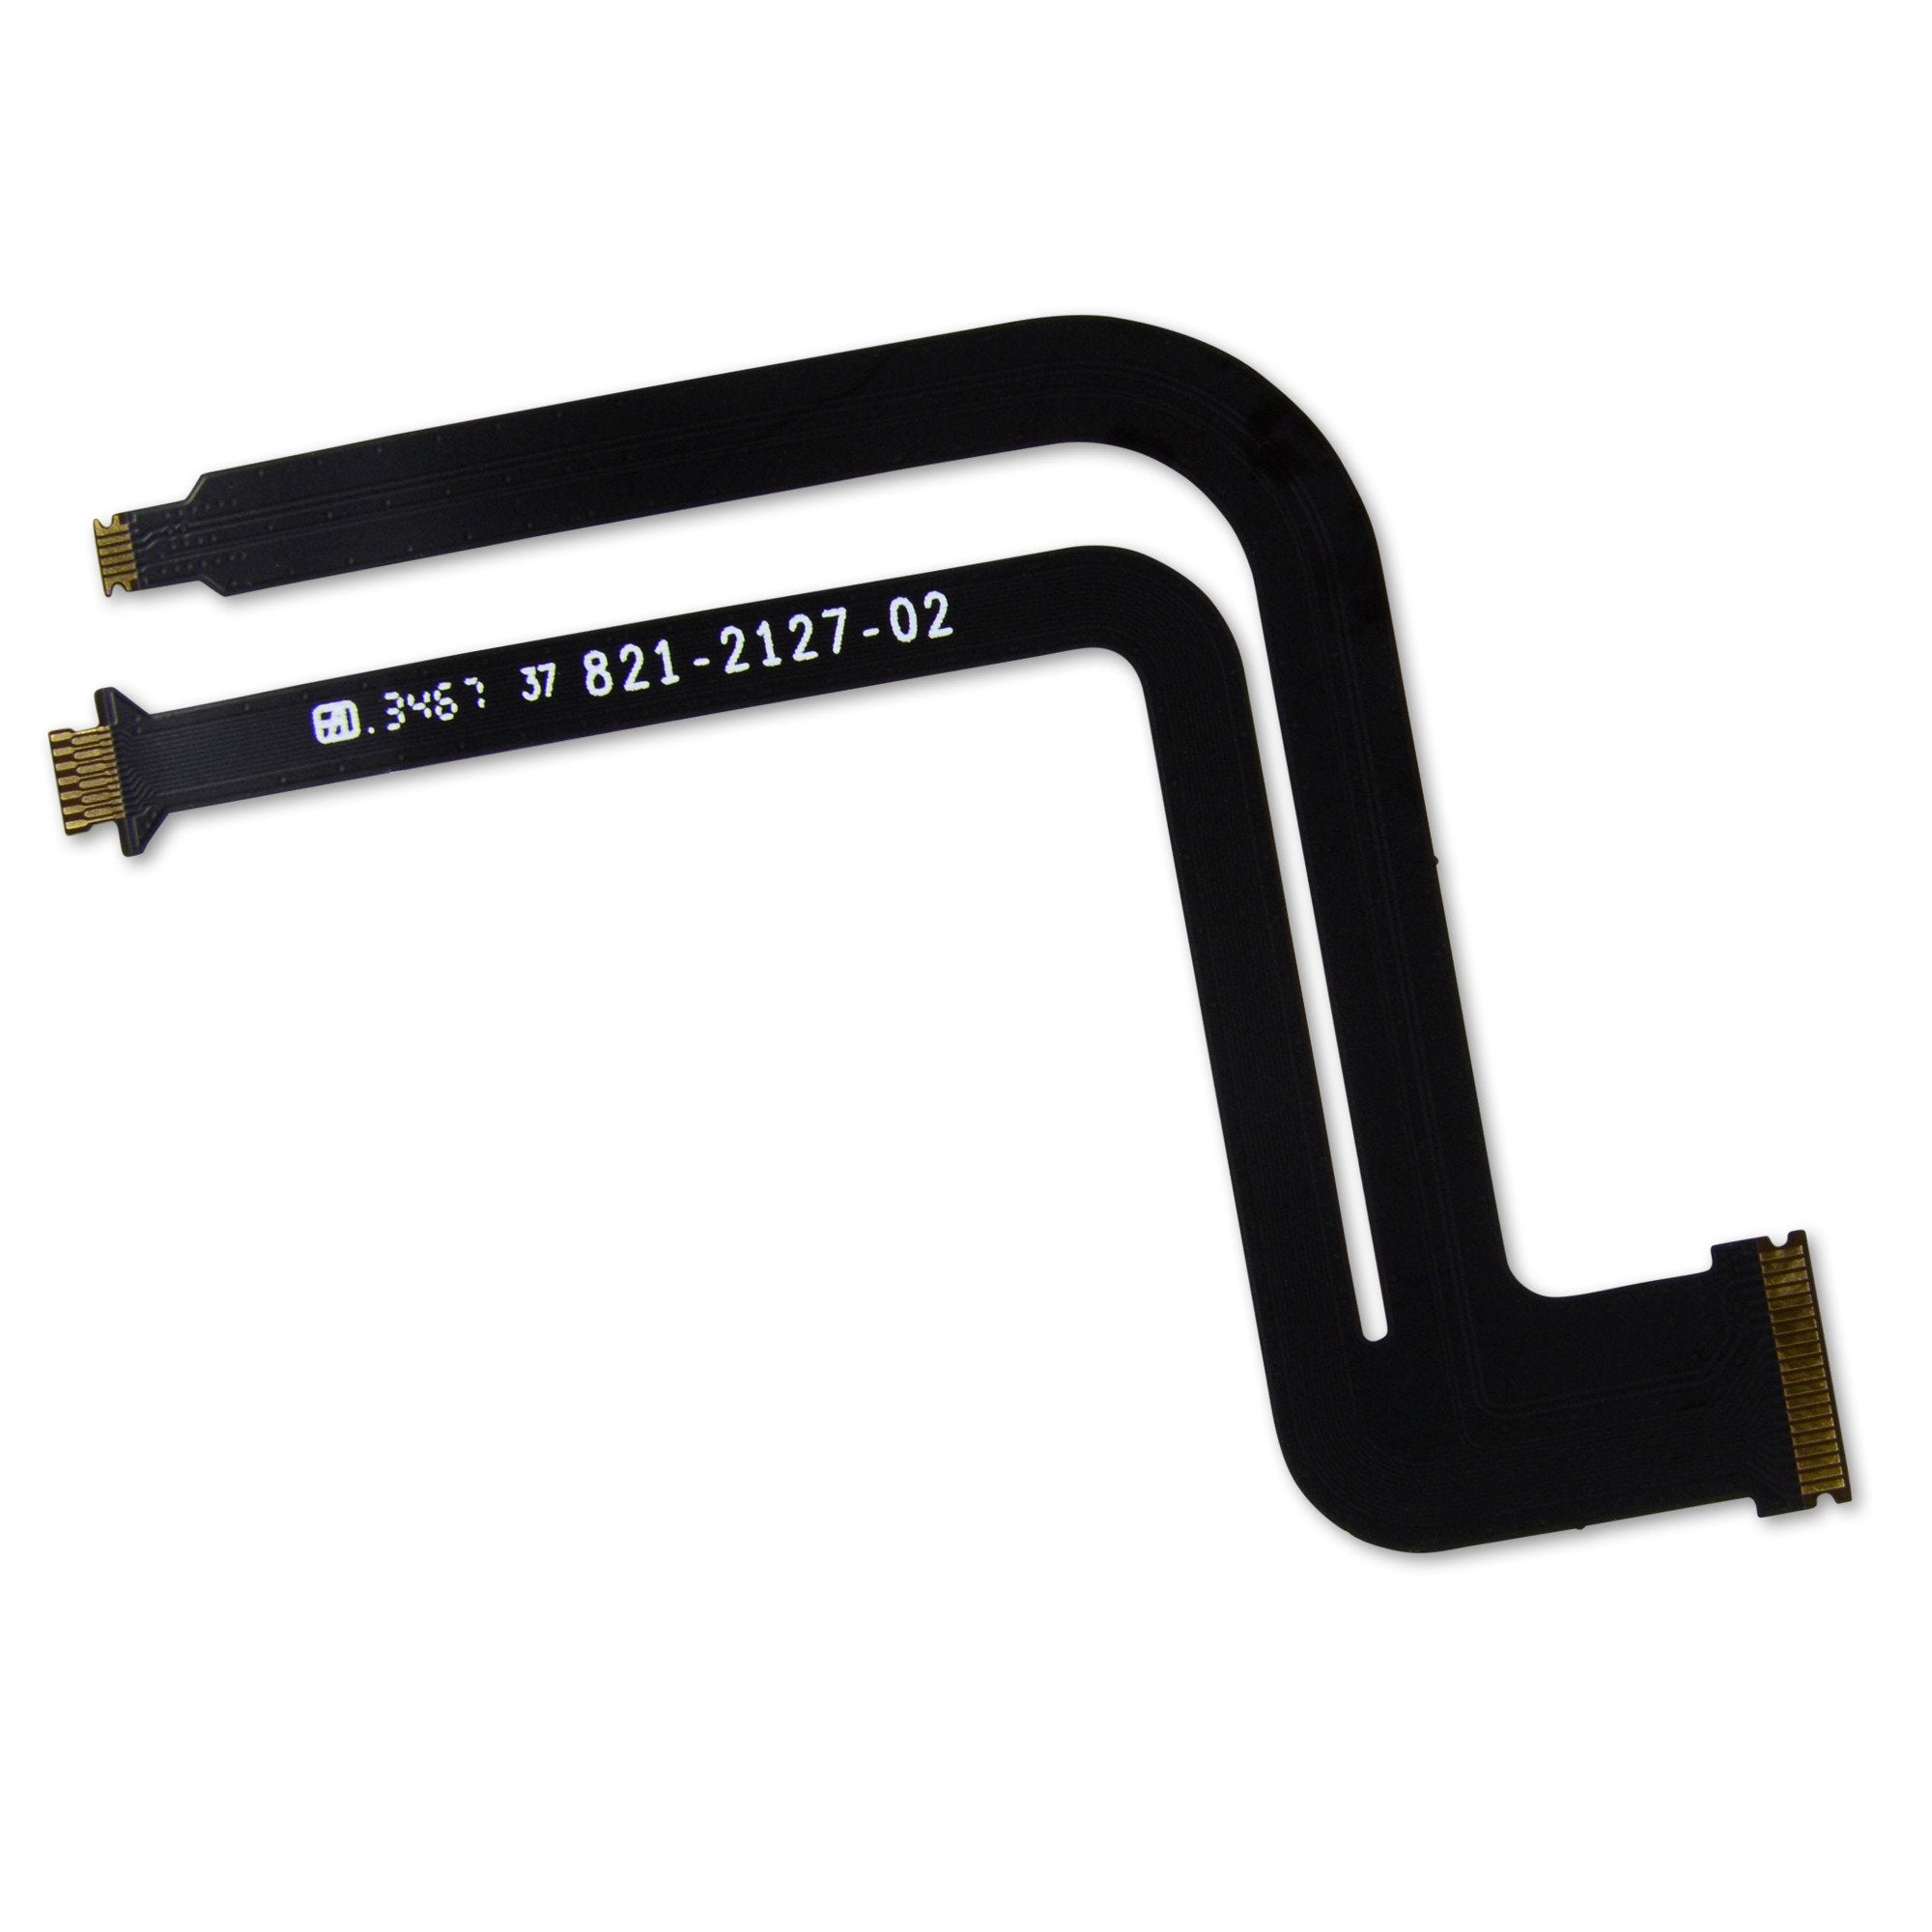 MacBook 12" Retina (Early 2015) LCD Backlight Interconnection Flex Cable